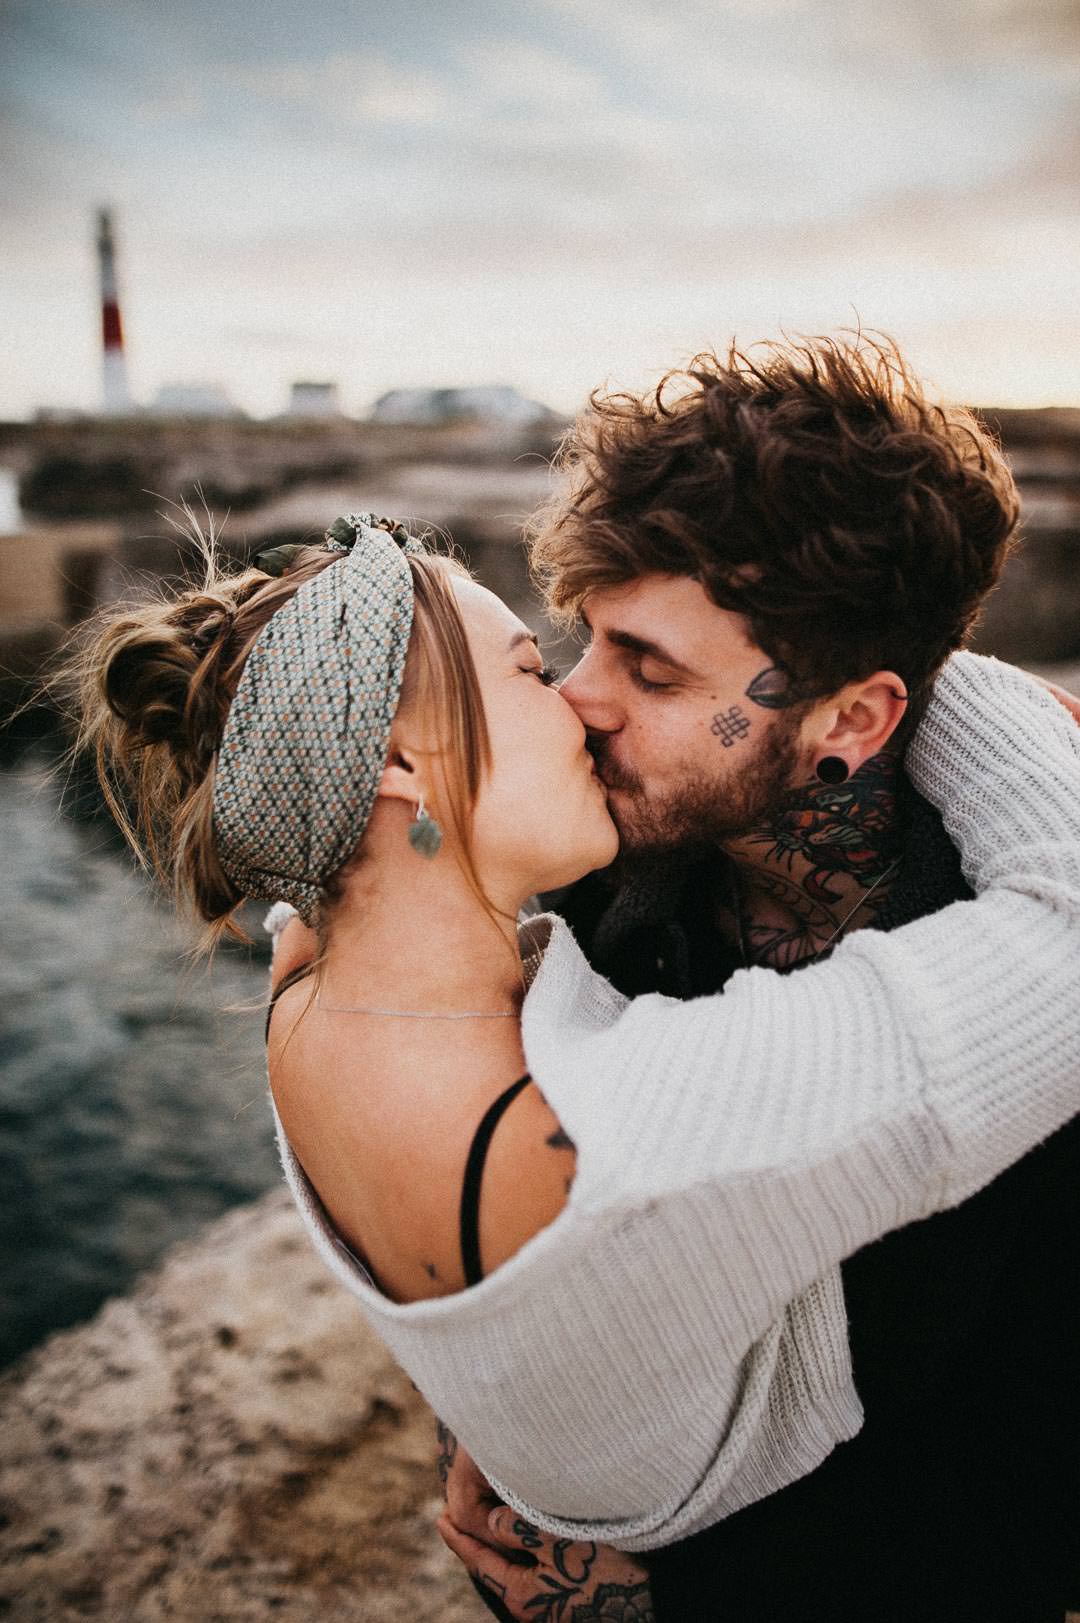 man with tattoos hugging woman in white sweater